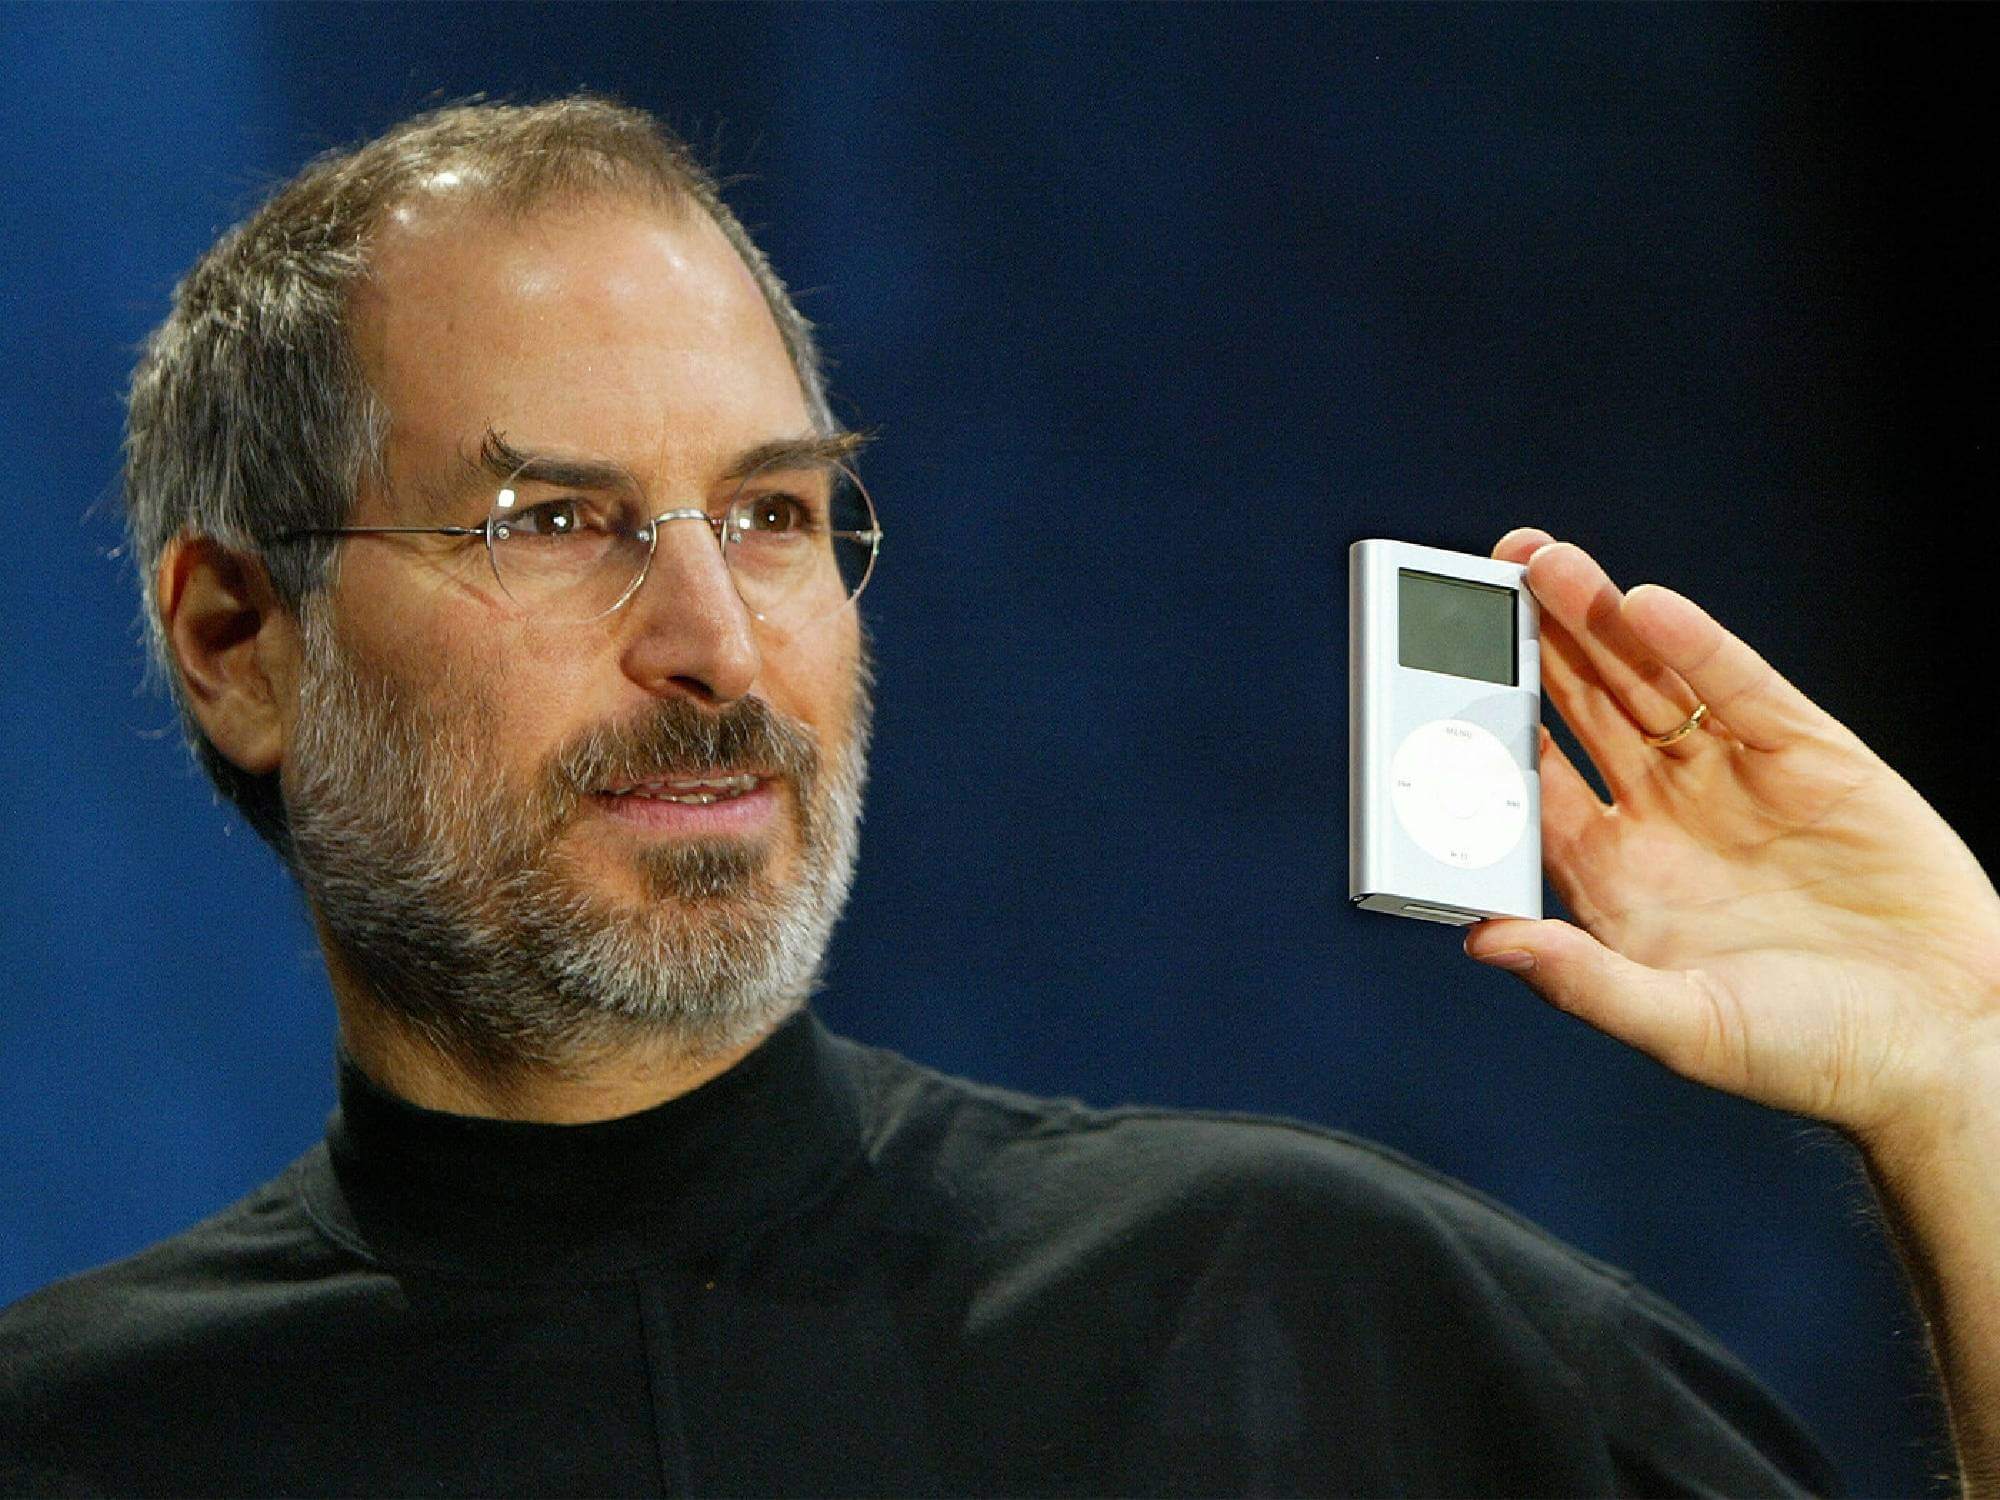 Steve Jobs with the iPod Mini in 2004